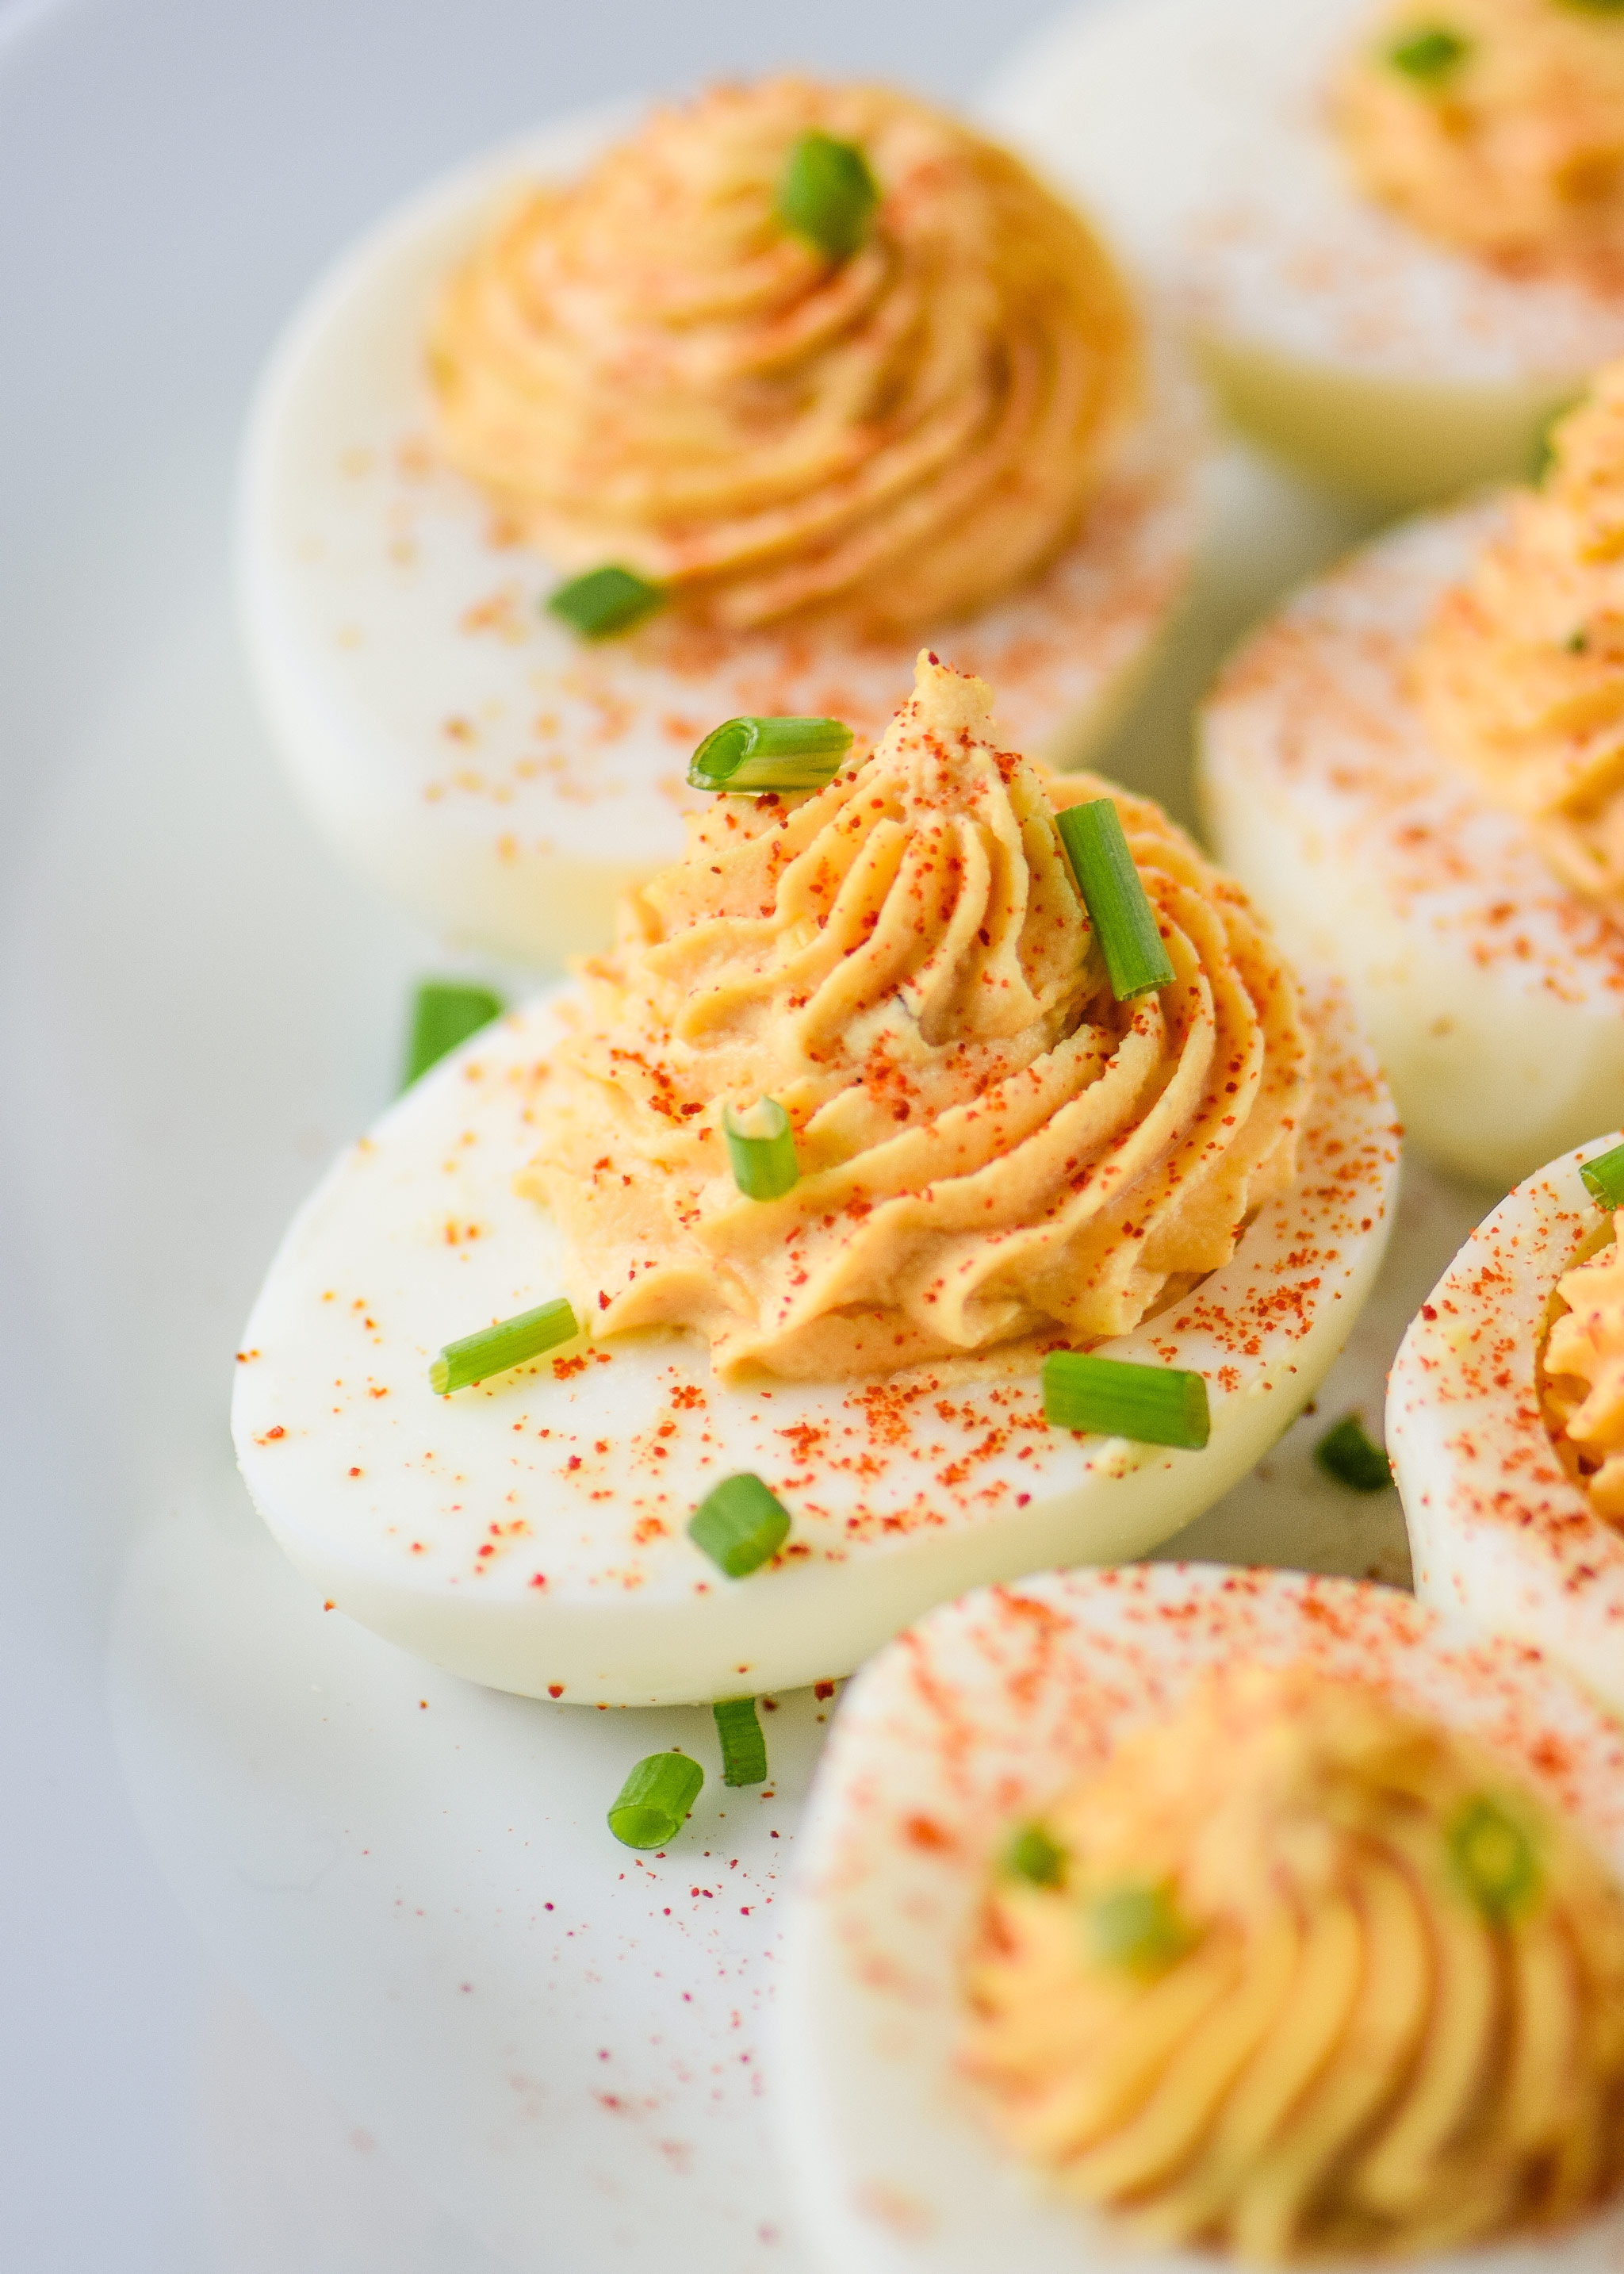 Whole30 Buffalo Deviled Eggs pictured with green onions and smoked paprika on top.